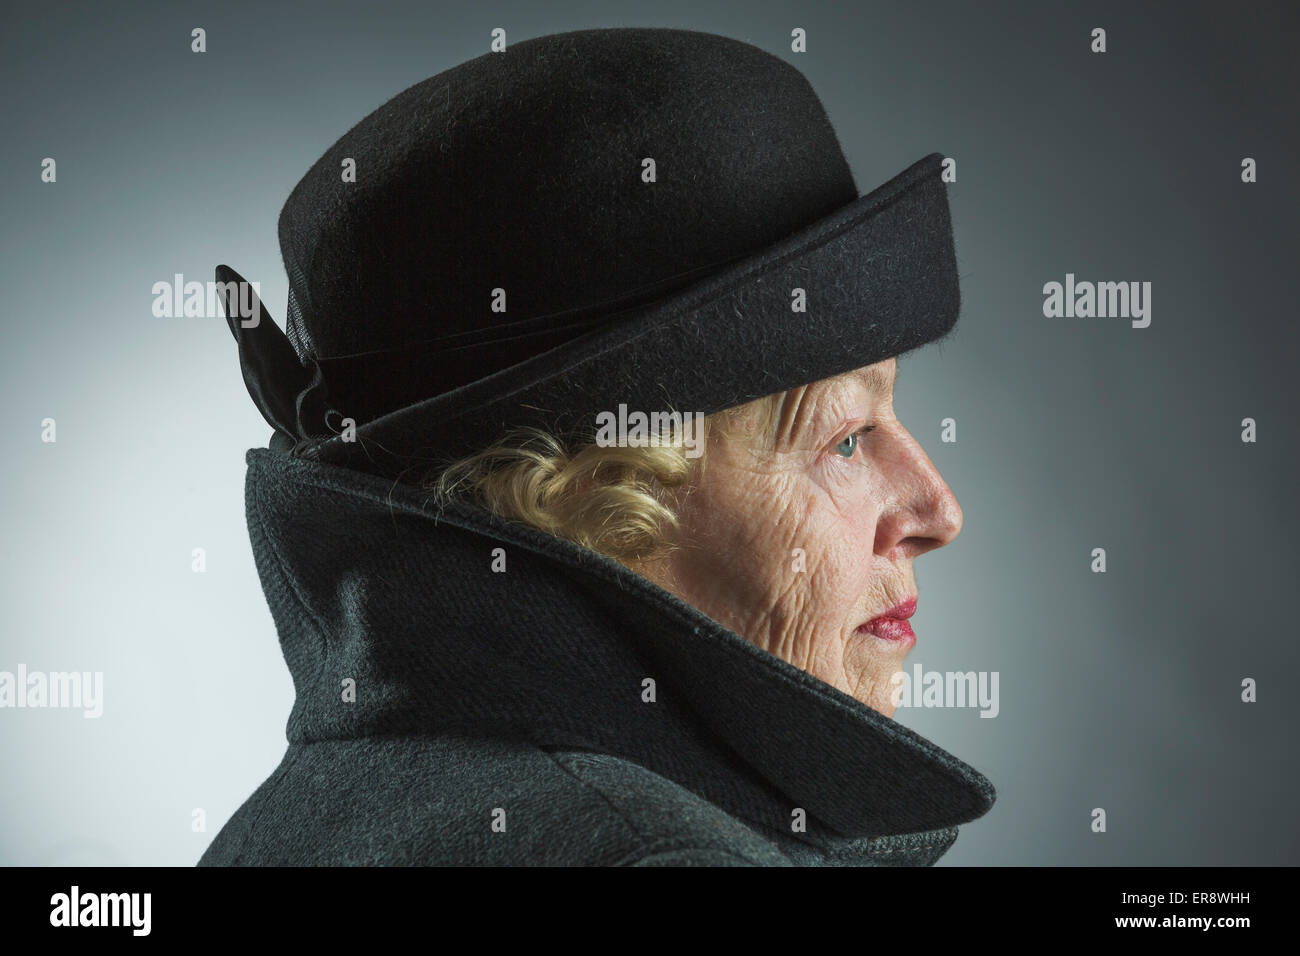 Side view of senior woman wearing hat and jacket against gray background Stock Photo